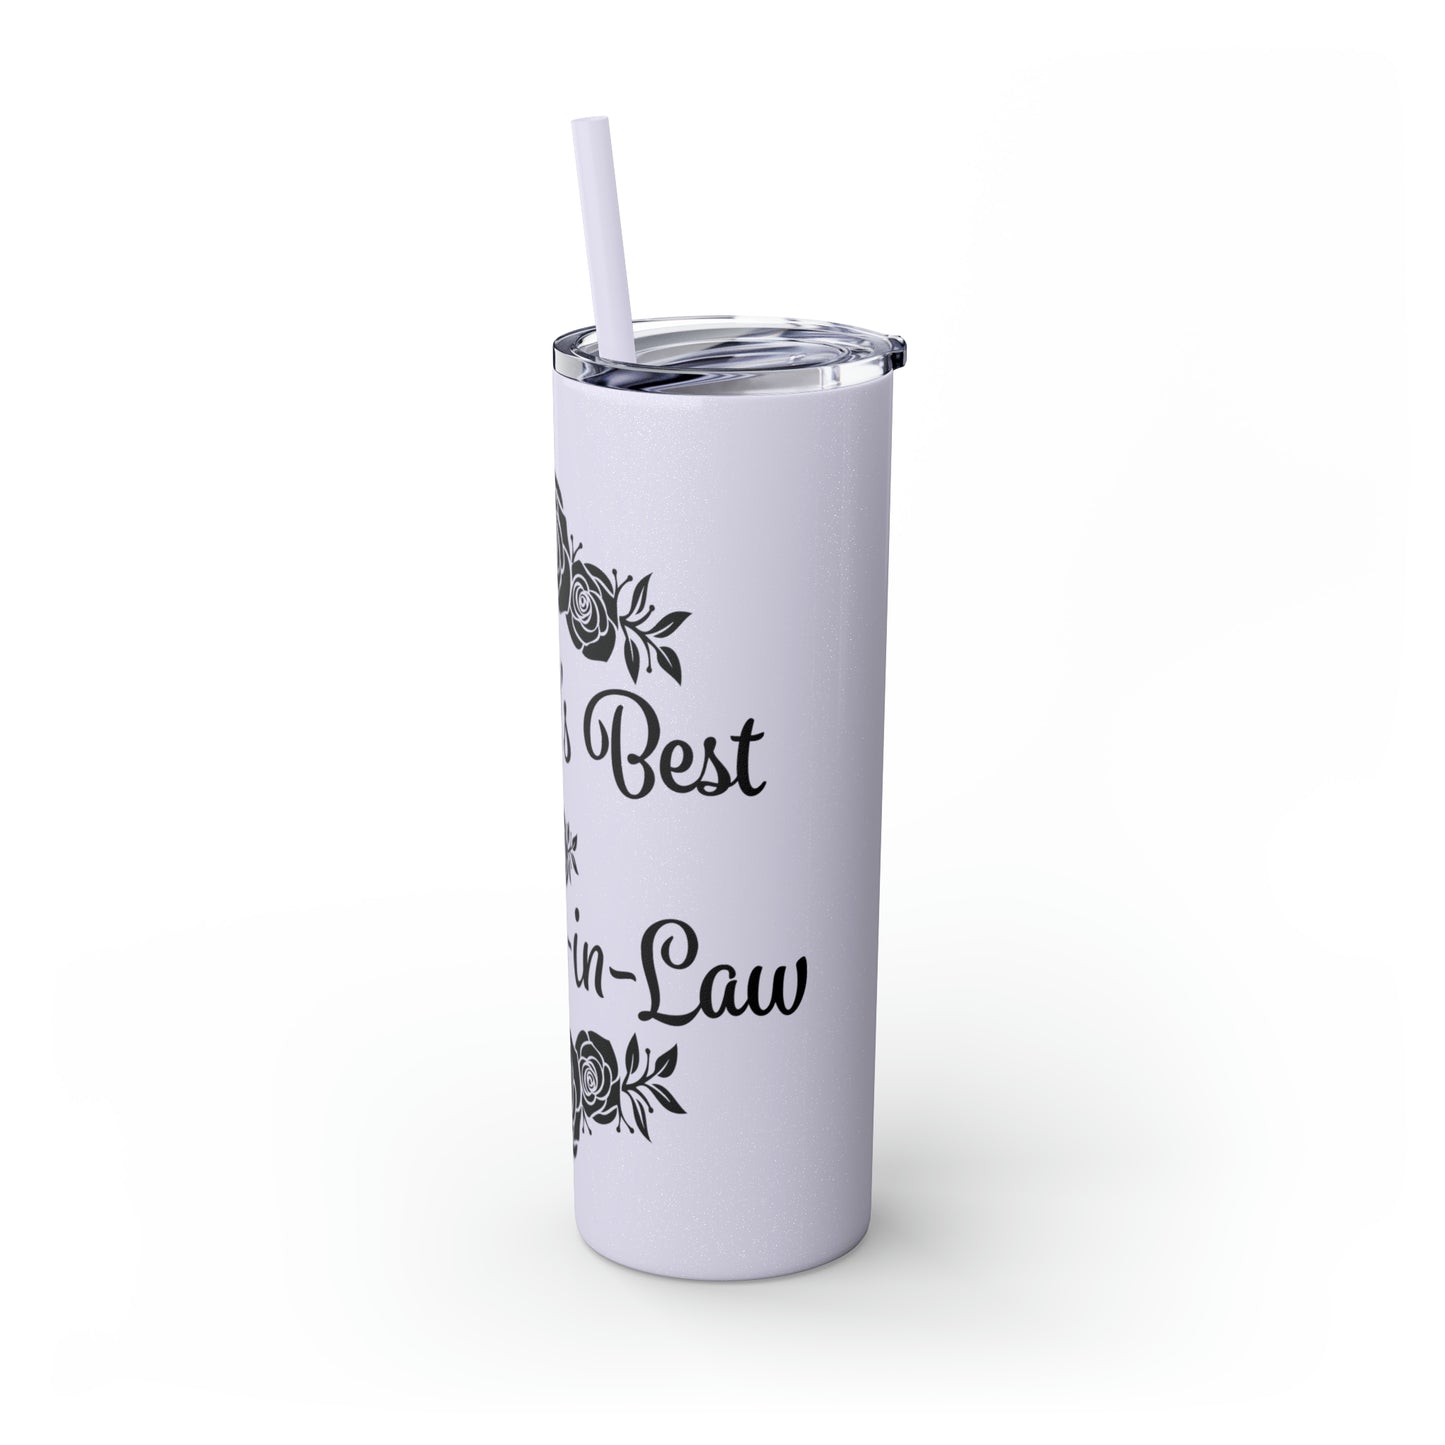 World's Best Mother-In-Law Skinny Tumbler with Straw, 20oz